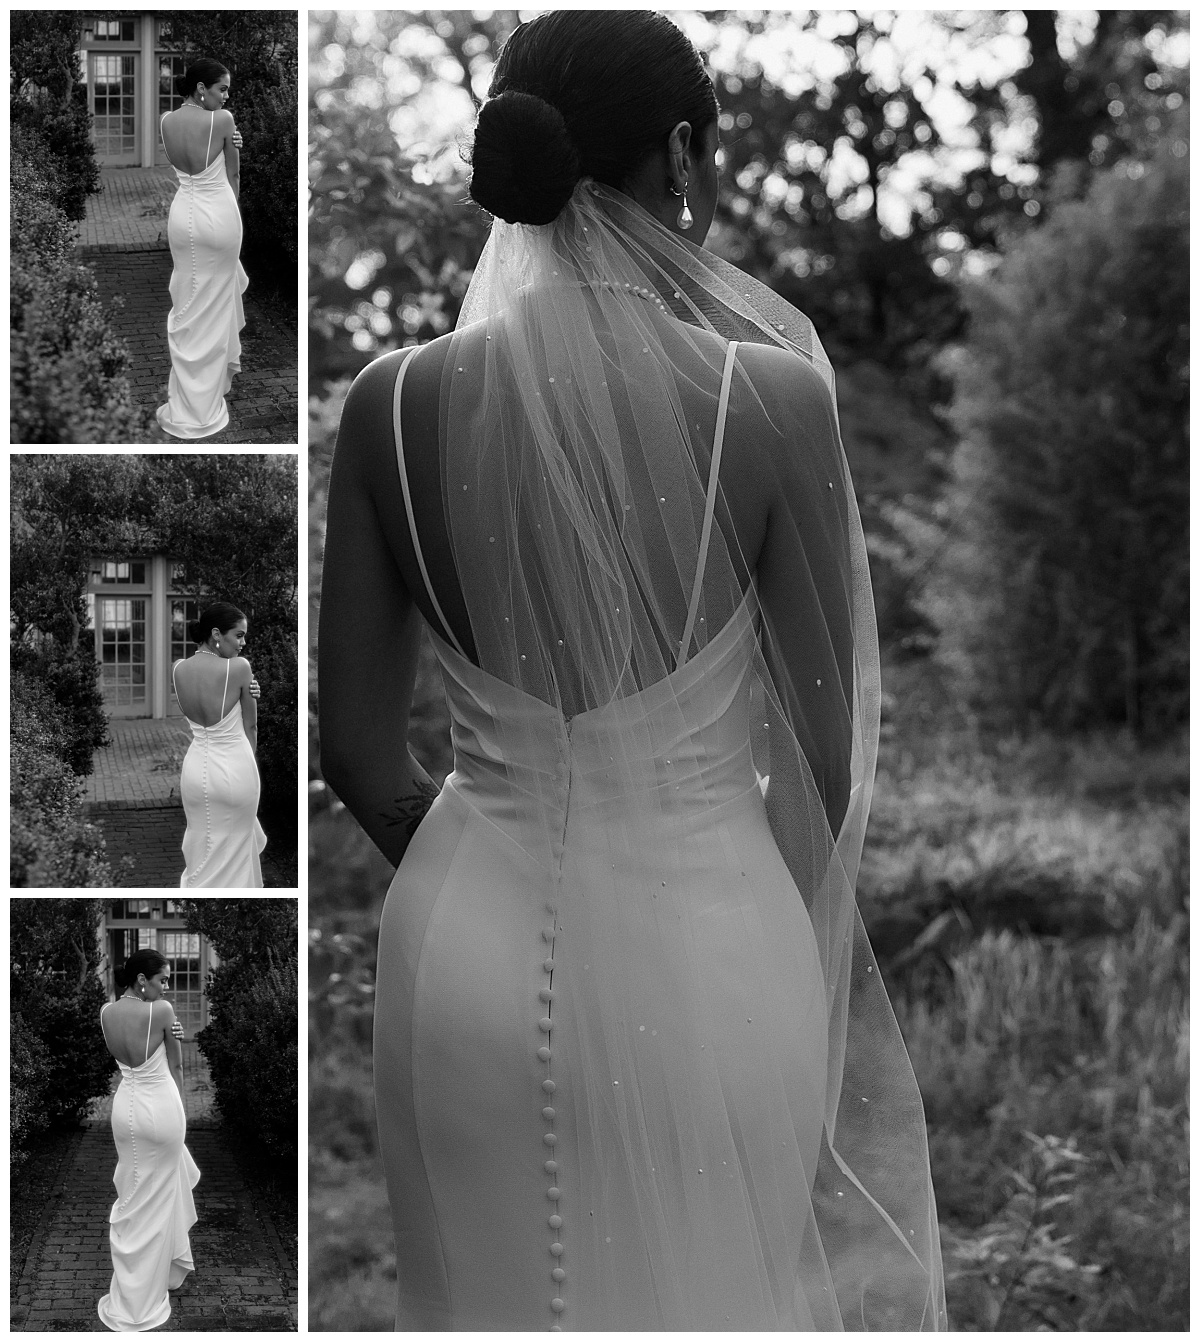 details of gown shown off as woman walks in garden at VanLandingham Estate bridal session